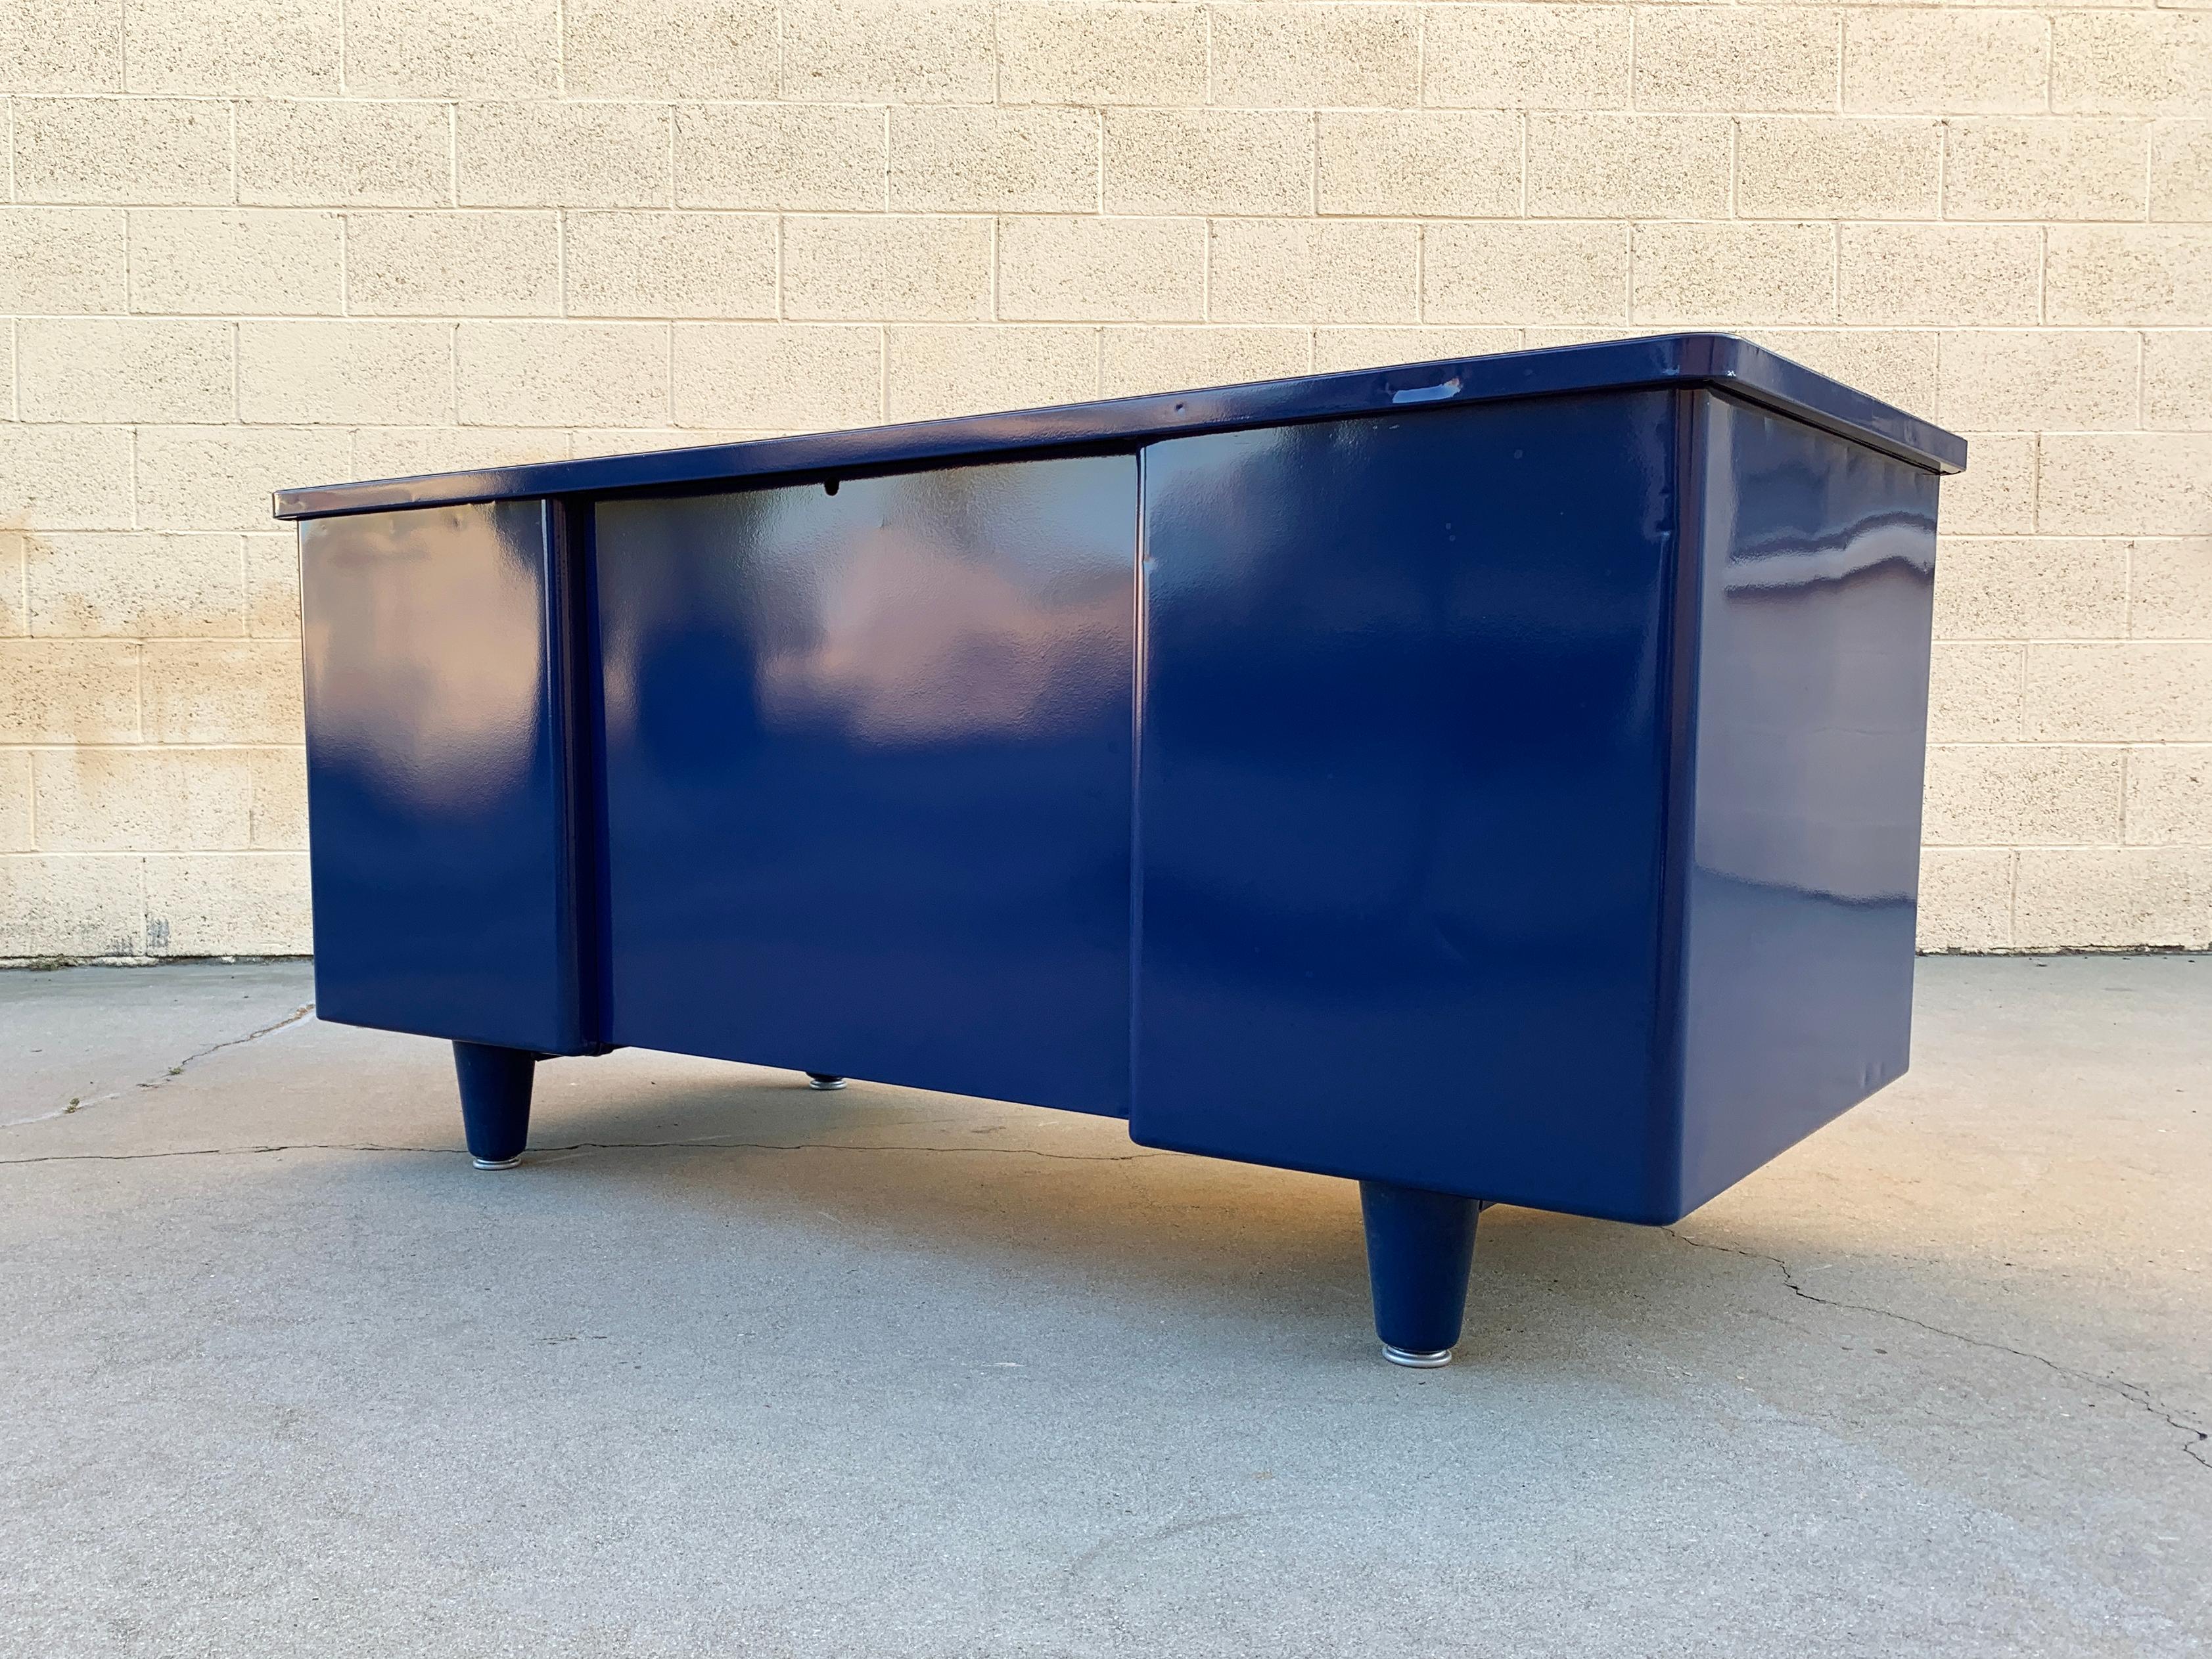 Aluminum McDowell Craig Midcentury Tanker Desk Refinished in Blue and Yellow For Sale